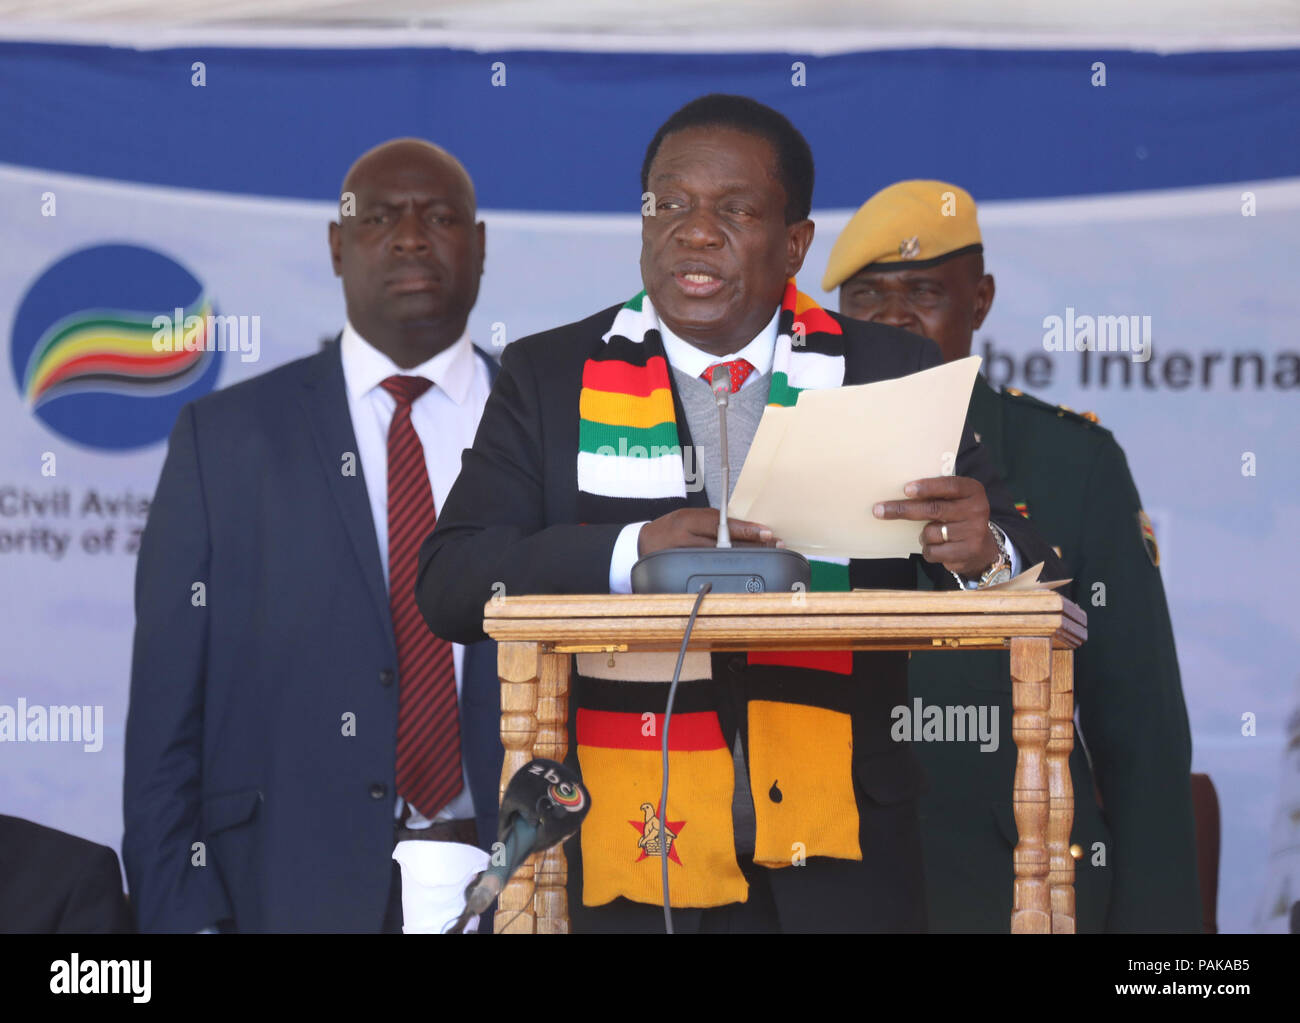 Harare, Zimbabwe. 23rd July 2018. Zimbabwean President Emmerson Mnangagwa (Front) addresses a groundbreaking ceremony of the upgrading and expansion project of the Robert Gabriel Mugabe International Airport in Harare, Zimbabwe, on July 23, 2018. Zimbabwe's main airport is set to undergo a major facelift to be funded by China as part of the government's efforts to transform the facility into a regional aviation hub. (Xinhua/Shaun Jusa) Credit: Xinhua/Alamy Live News Stock Photo